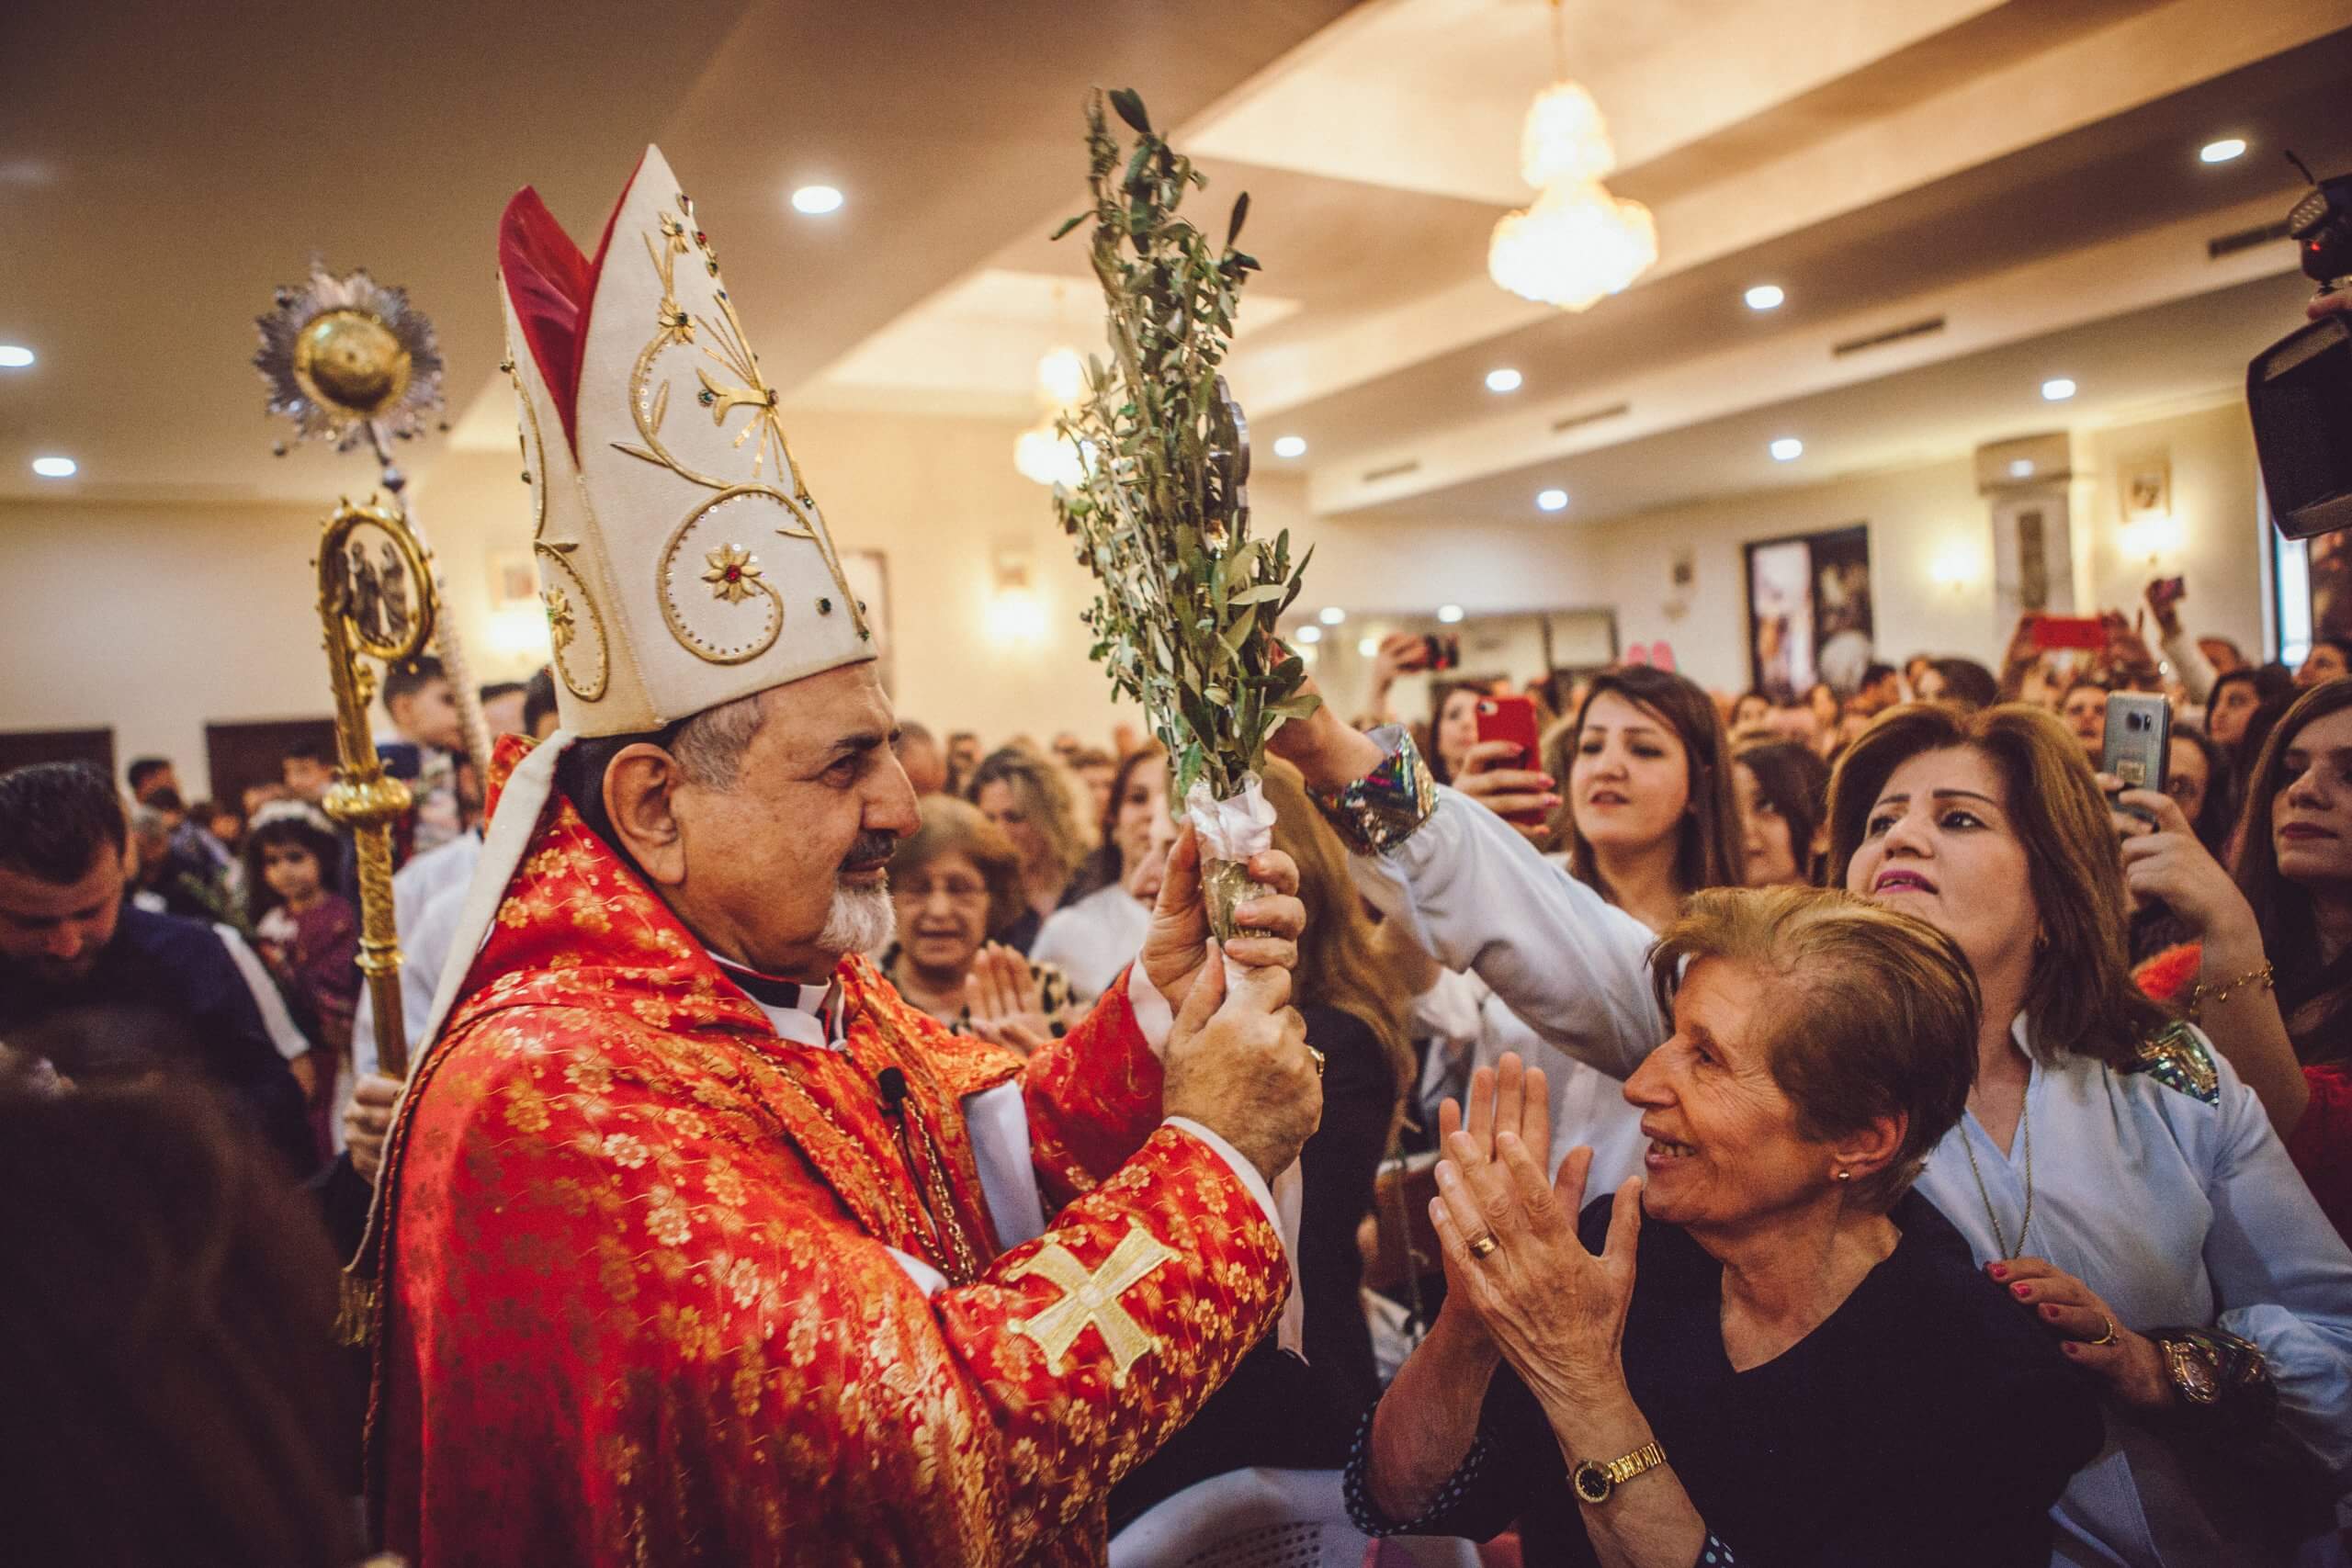 A team from SOS Chrétiens d'Orient celebrates the resurrection of Christ in Iraq.